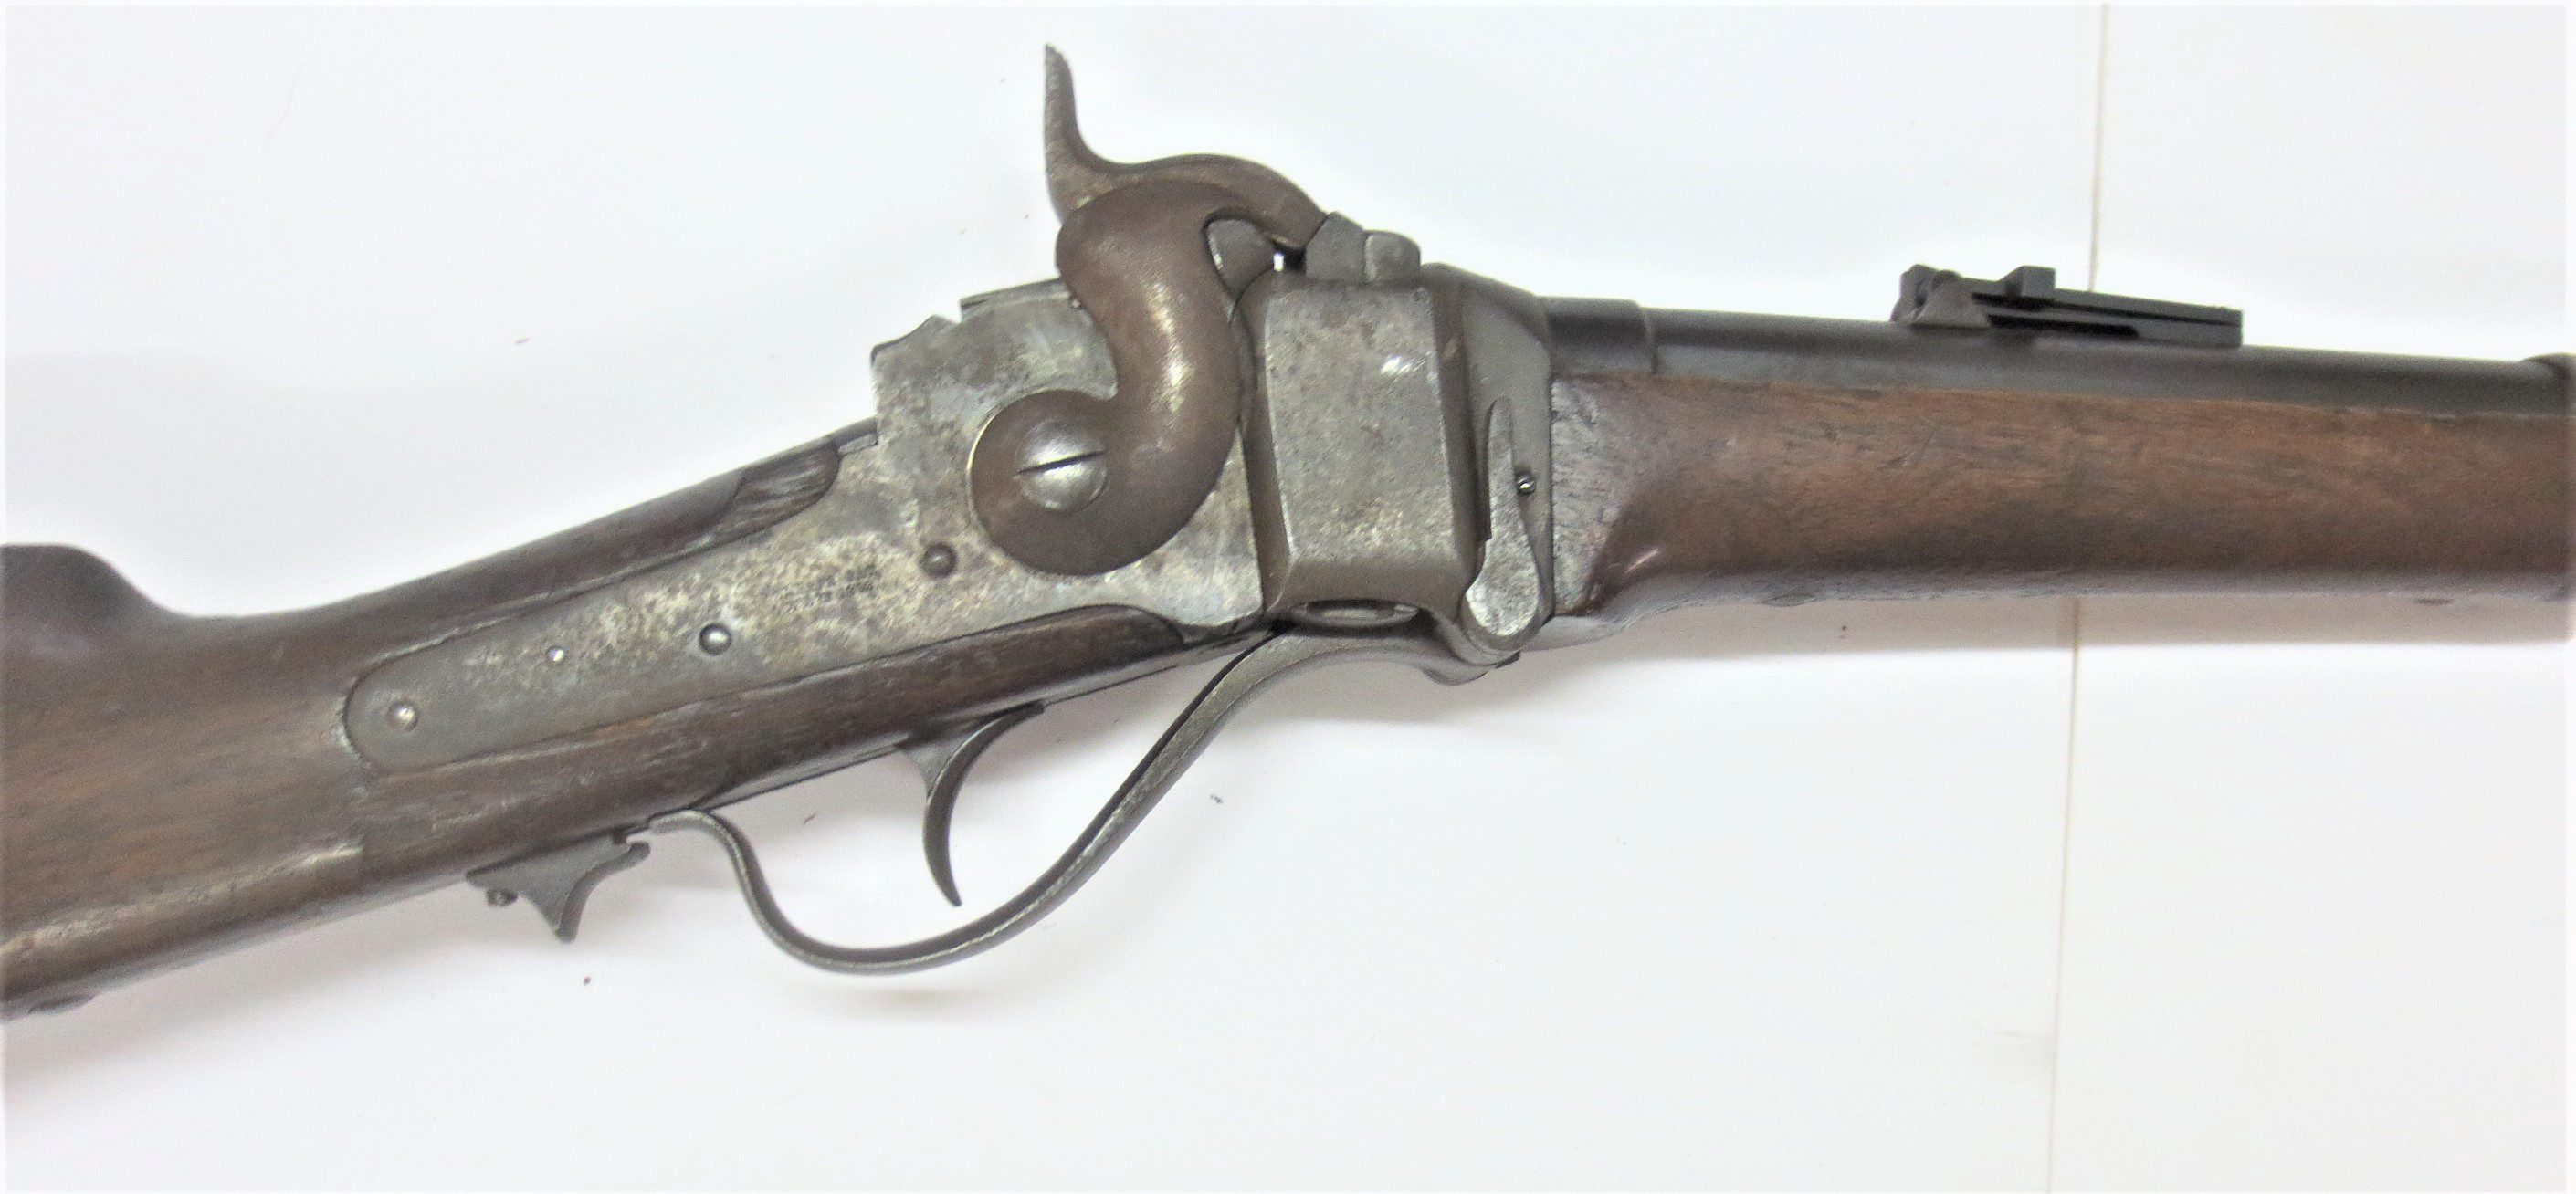 Weapon example of civil war m1863